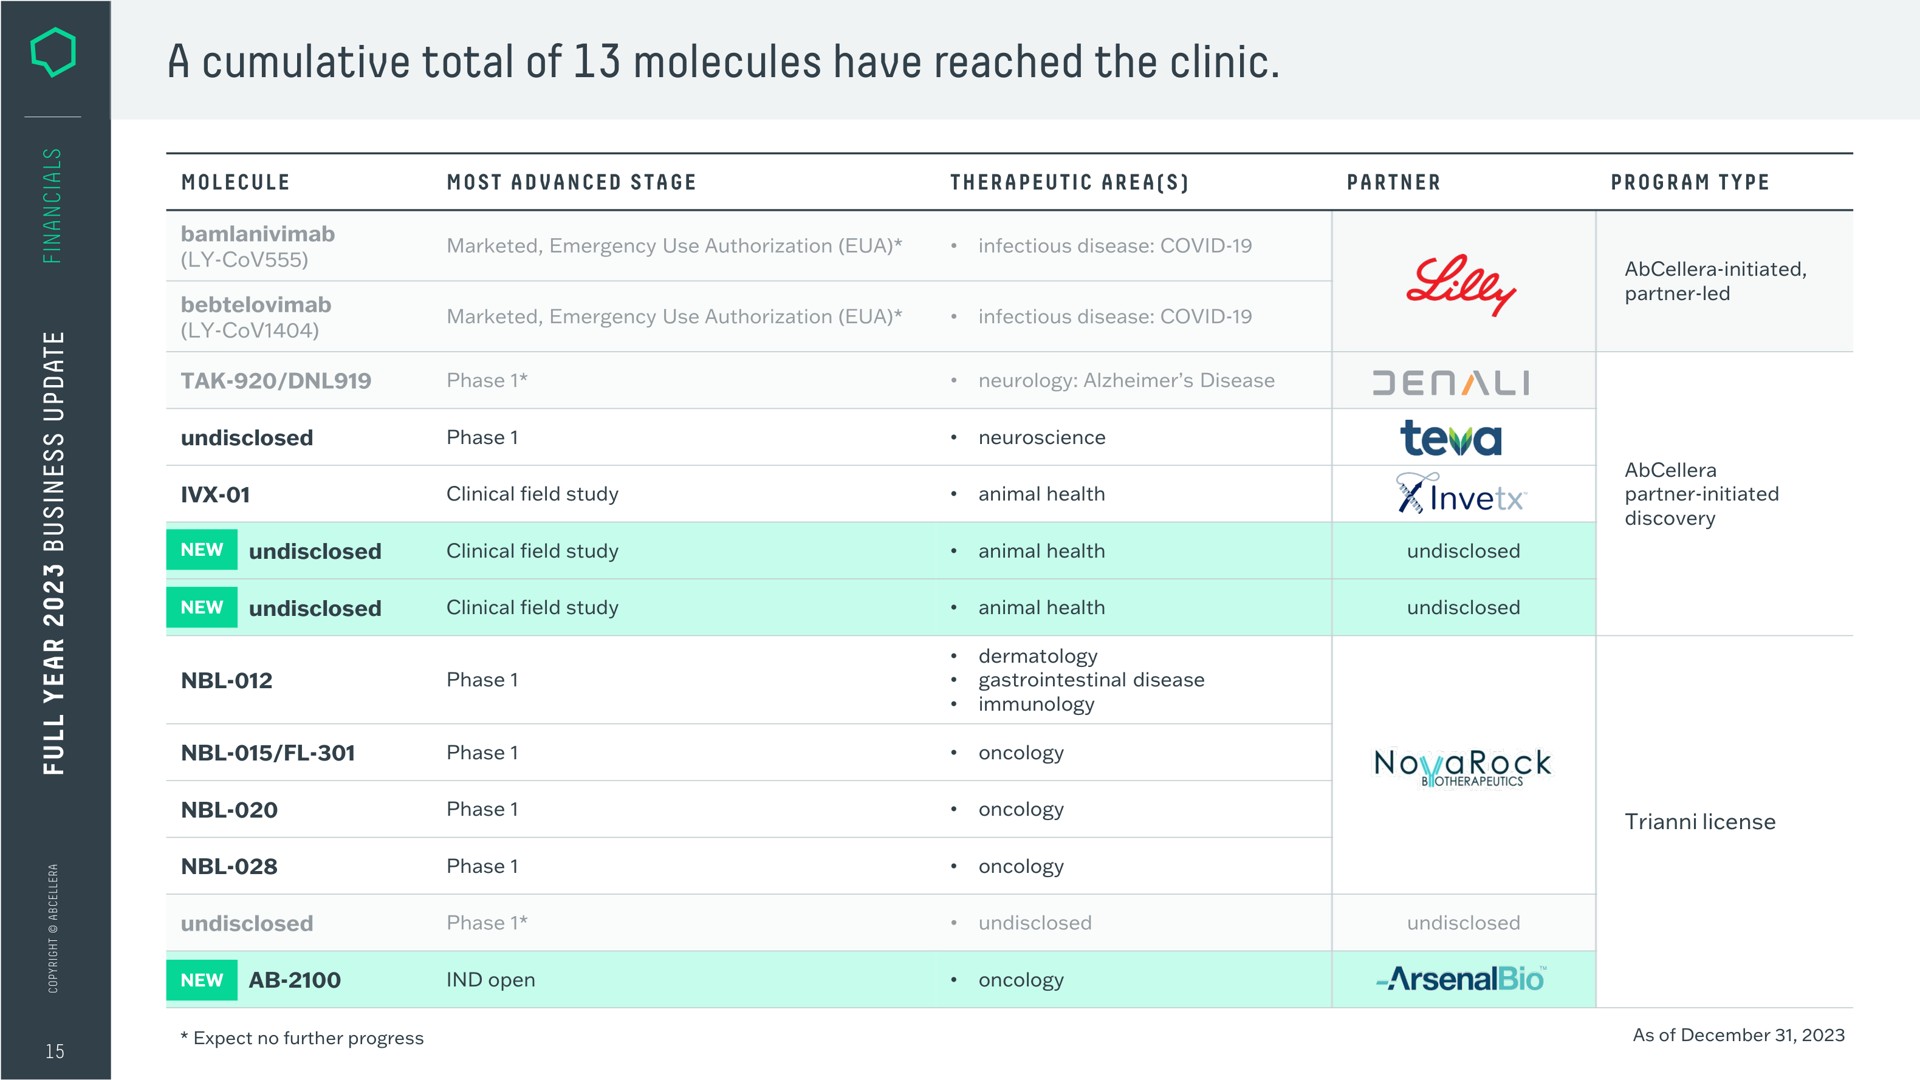 a cumulative total of molecules have reached the clinic | AbCellera